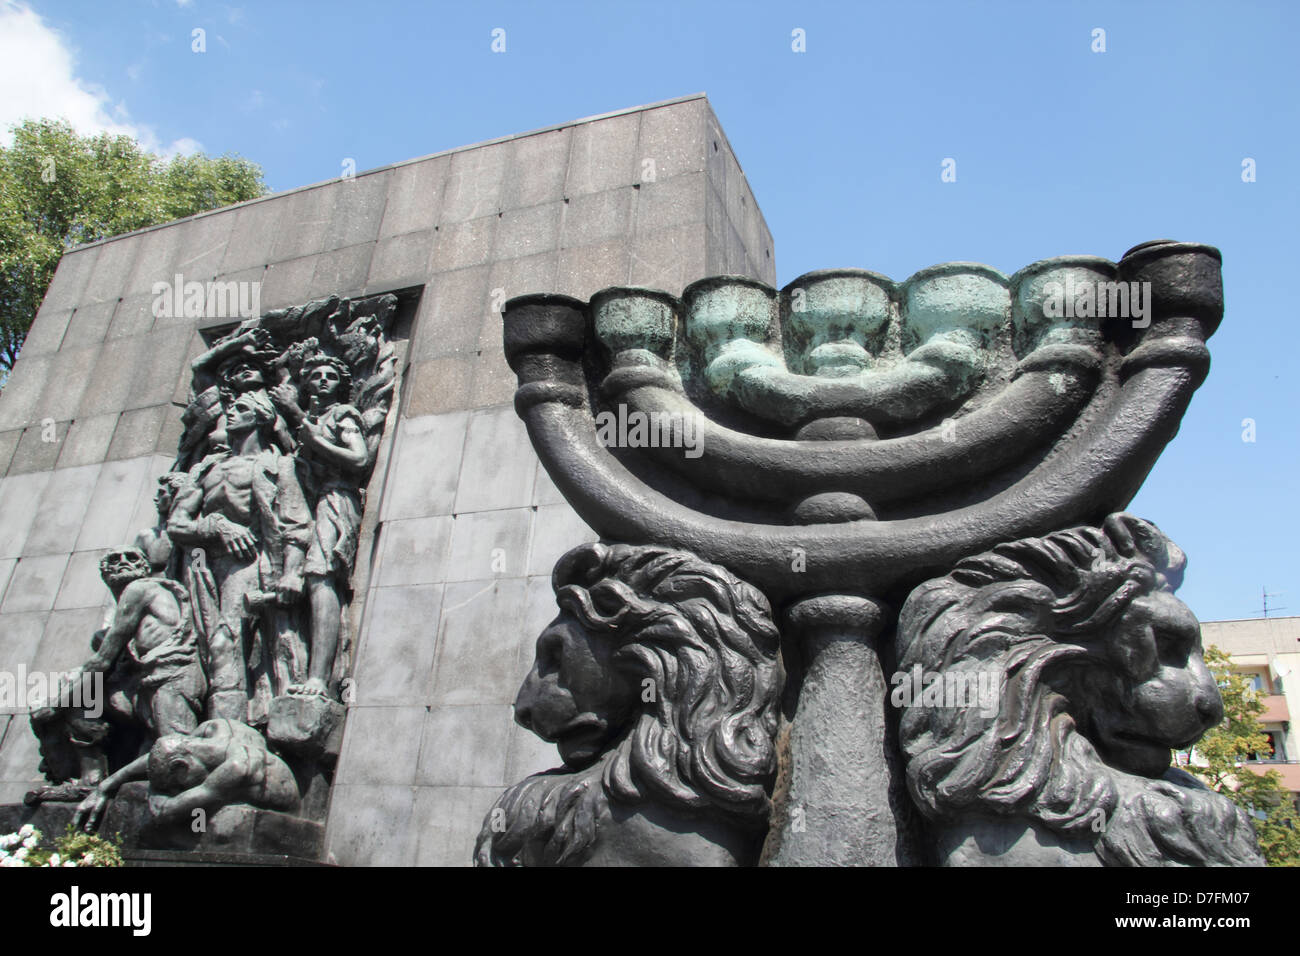 Memorial Monument To Heroes Of Warsaw Ghetto Created By Nathan Rappaport, Located In Warsaw, Poland Stock Photo